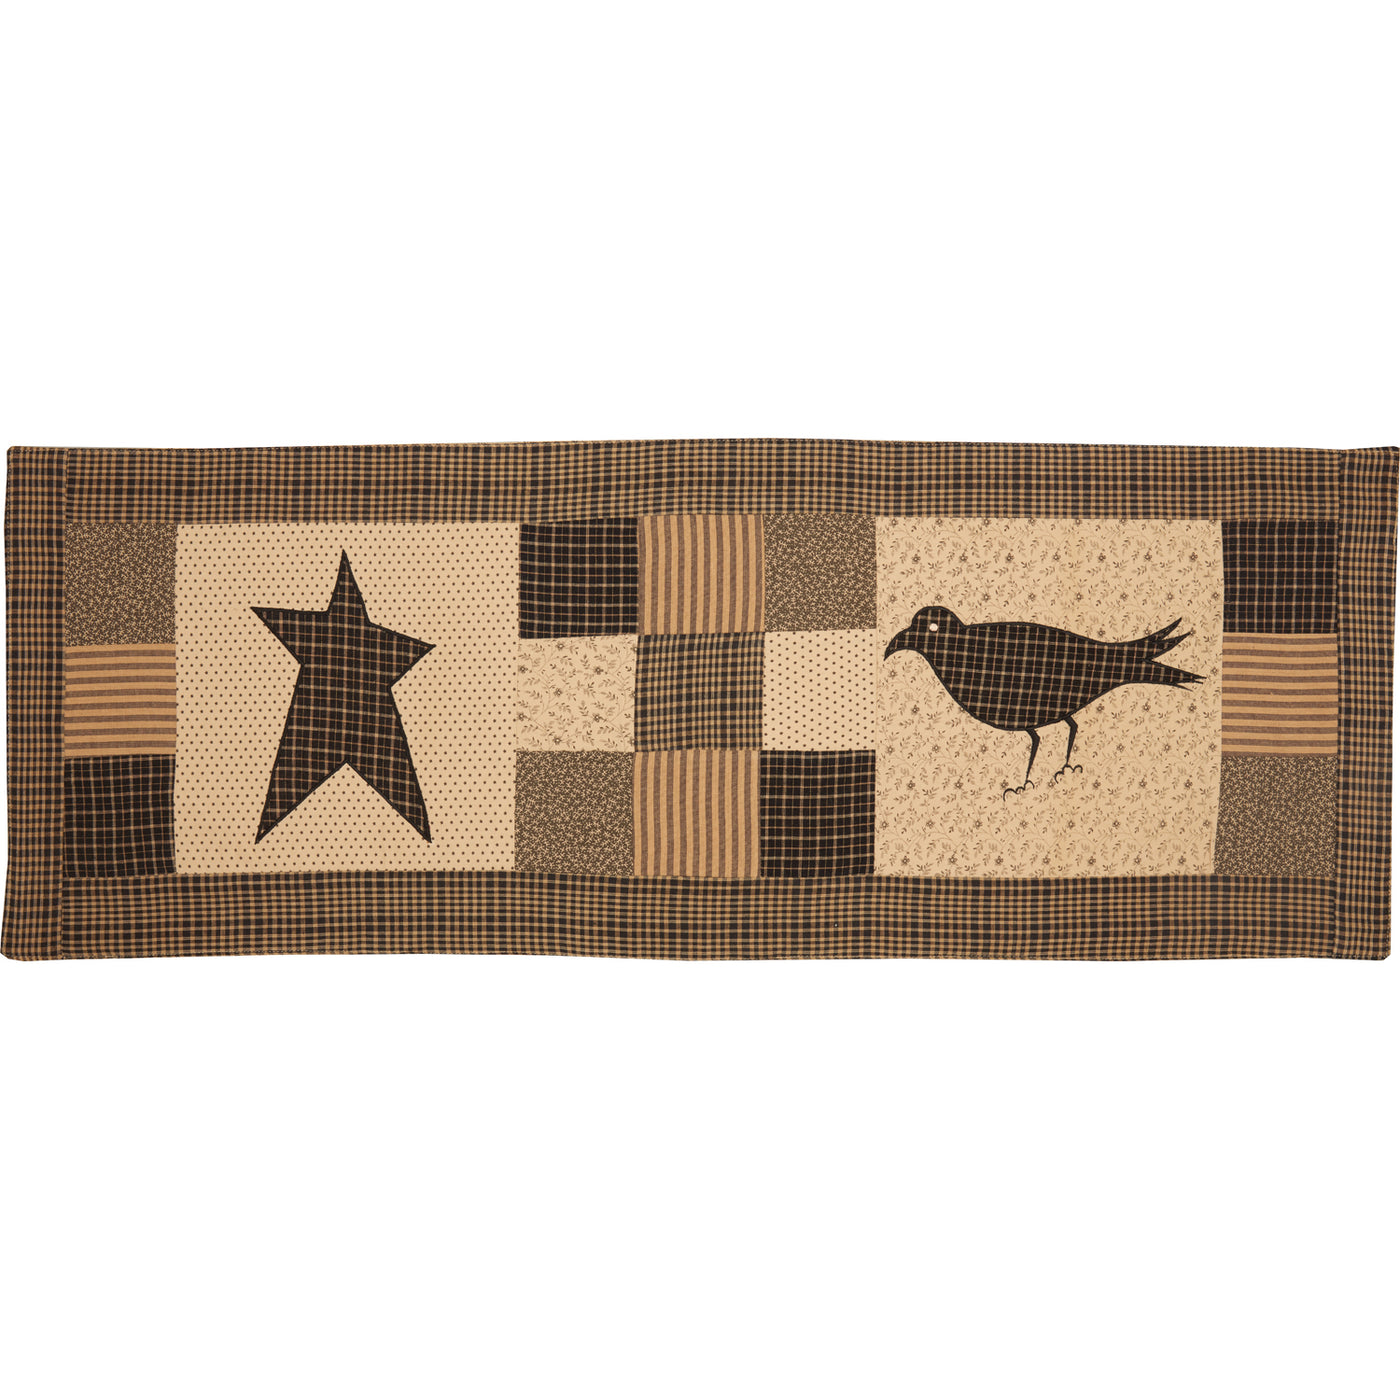 Kettle Grove Table Runner Crow and Star 13" x 36"